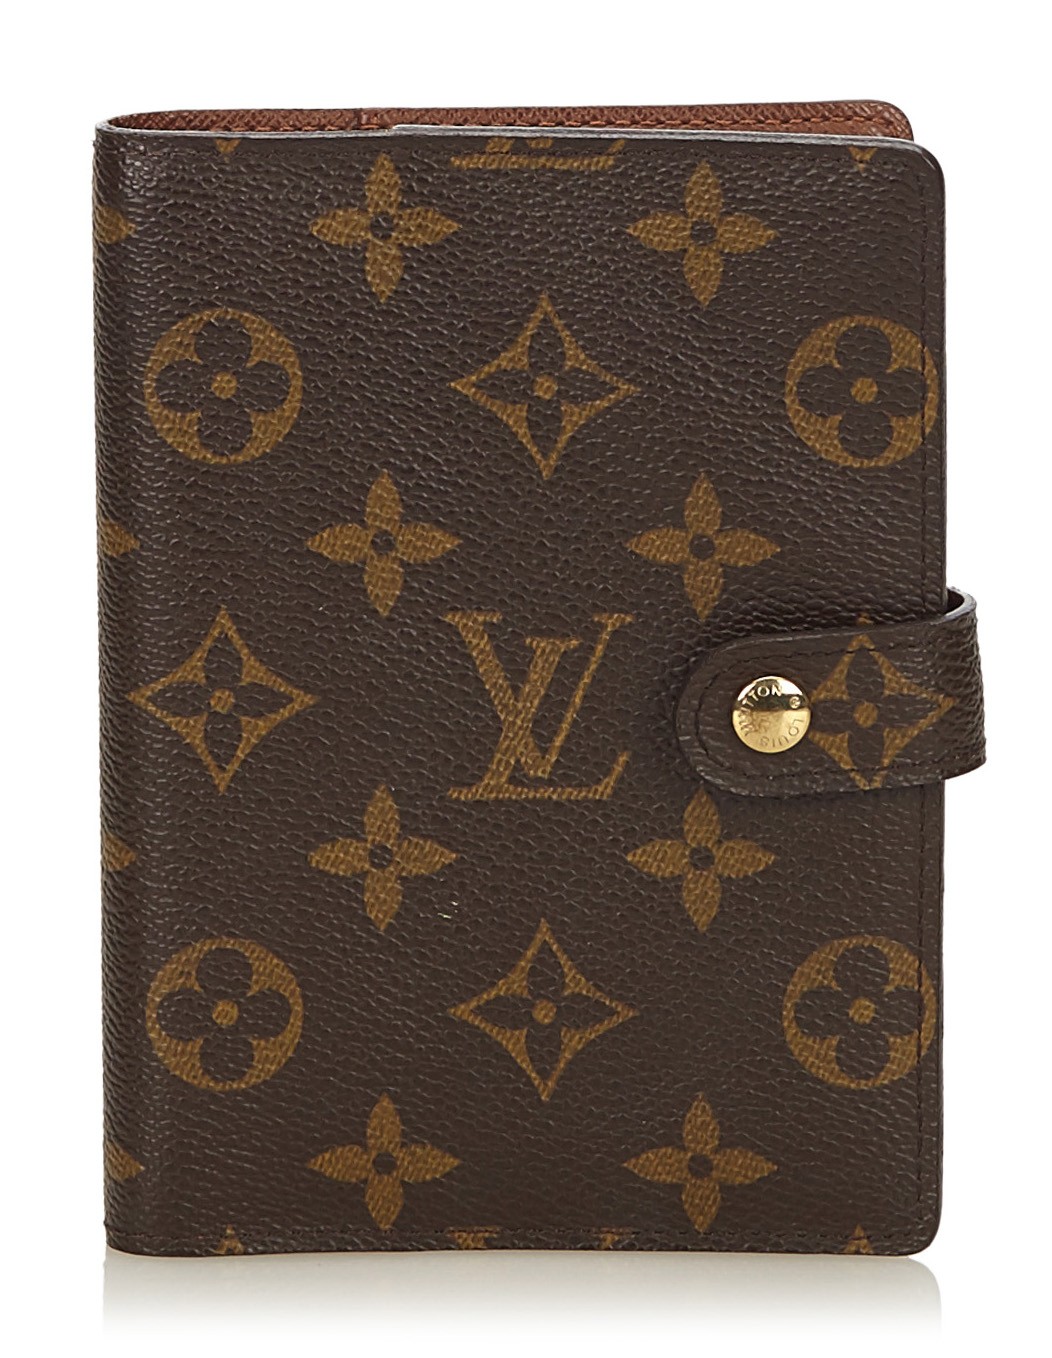 Louis Vuitton Vintage - Agenda - Brown - in Monogram Leather and Leather - Luxury High Quality - Avvenice